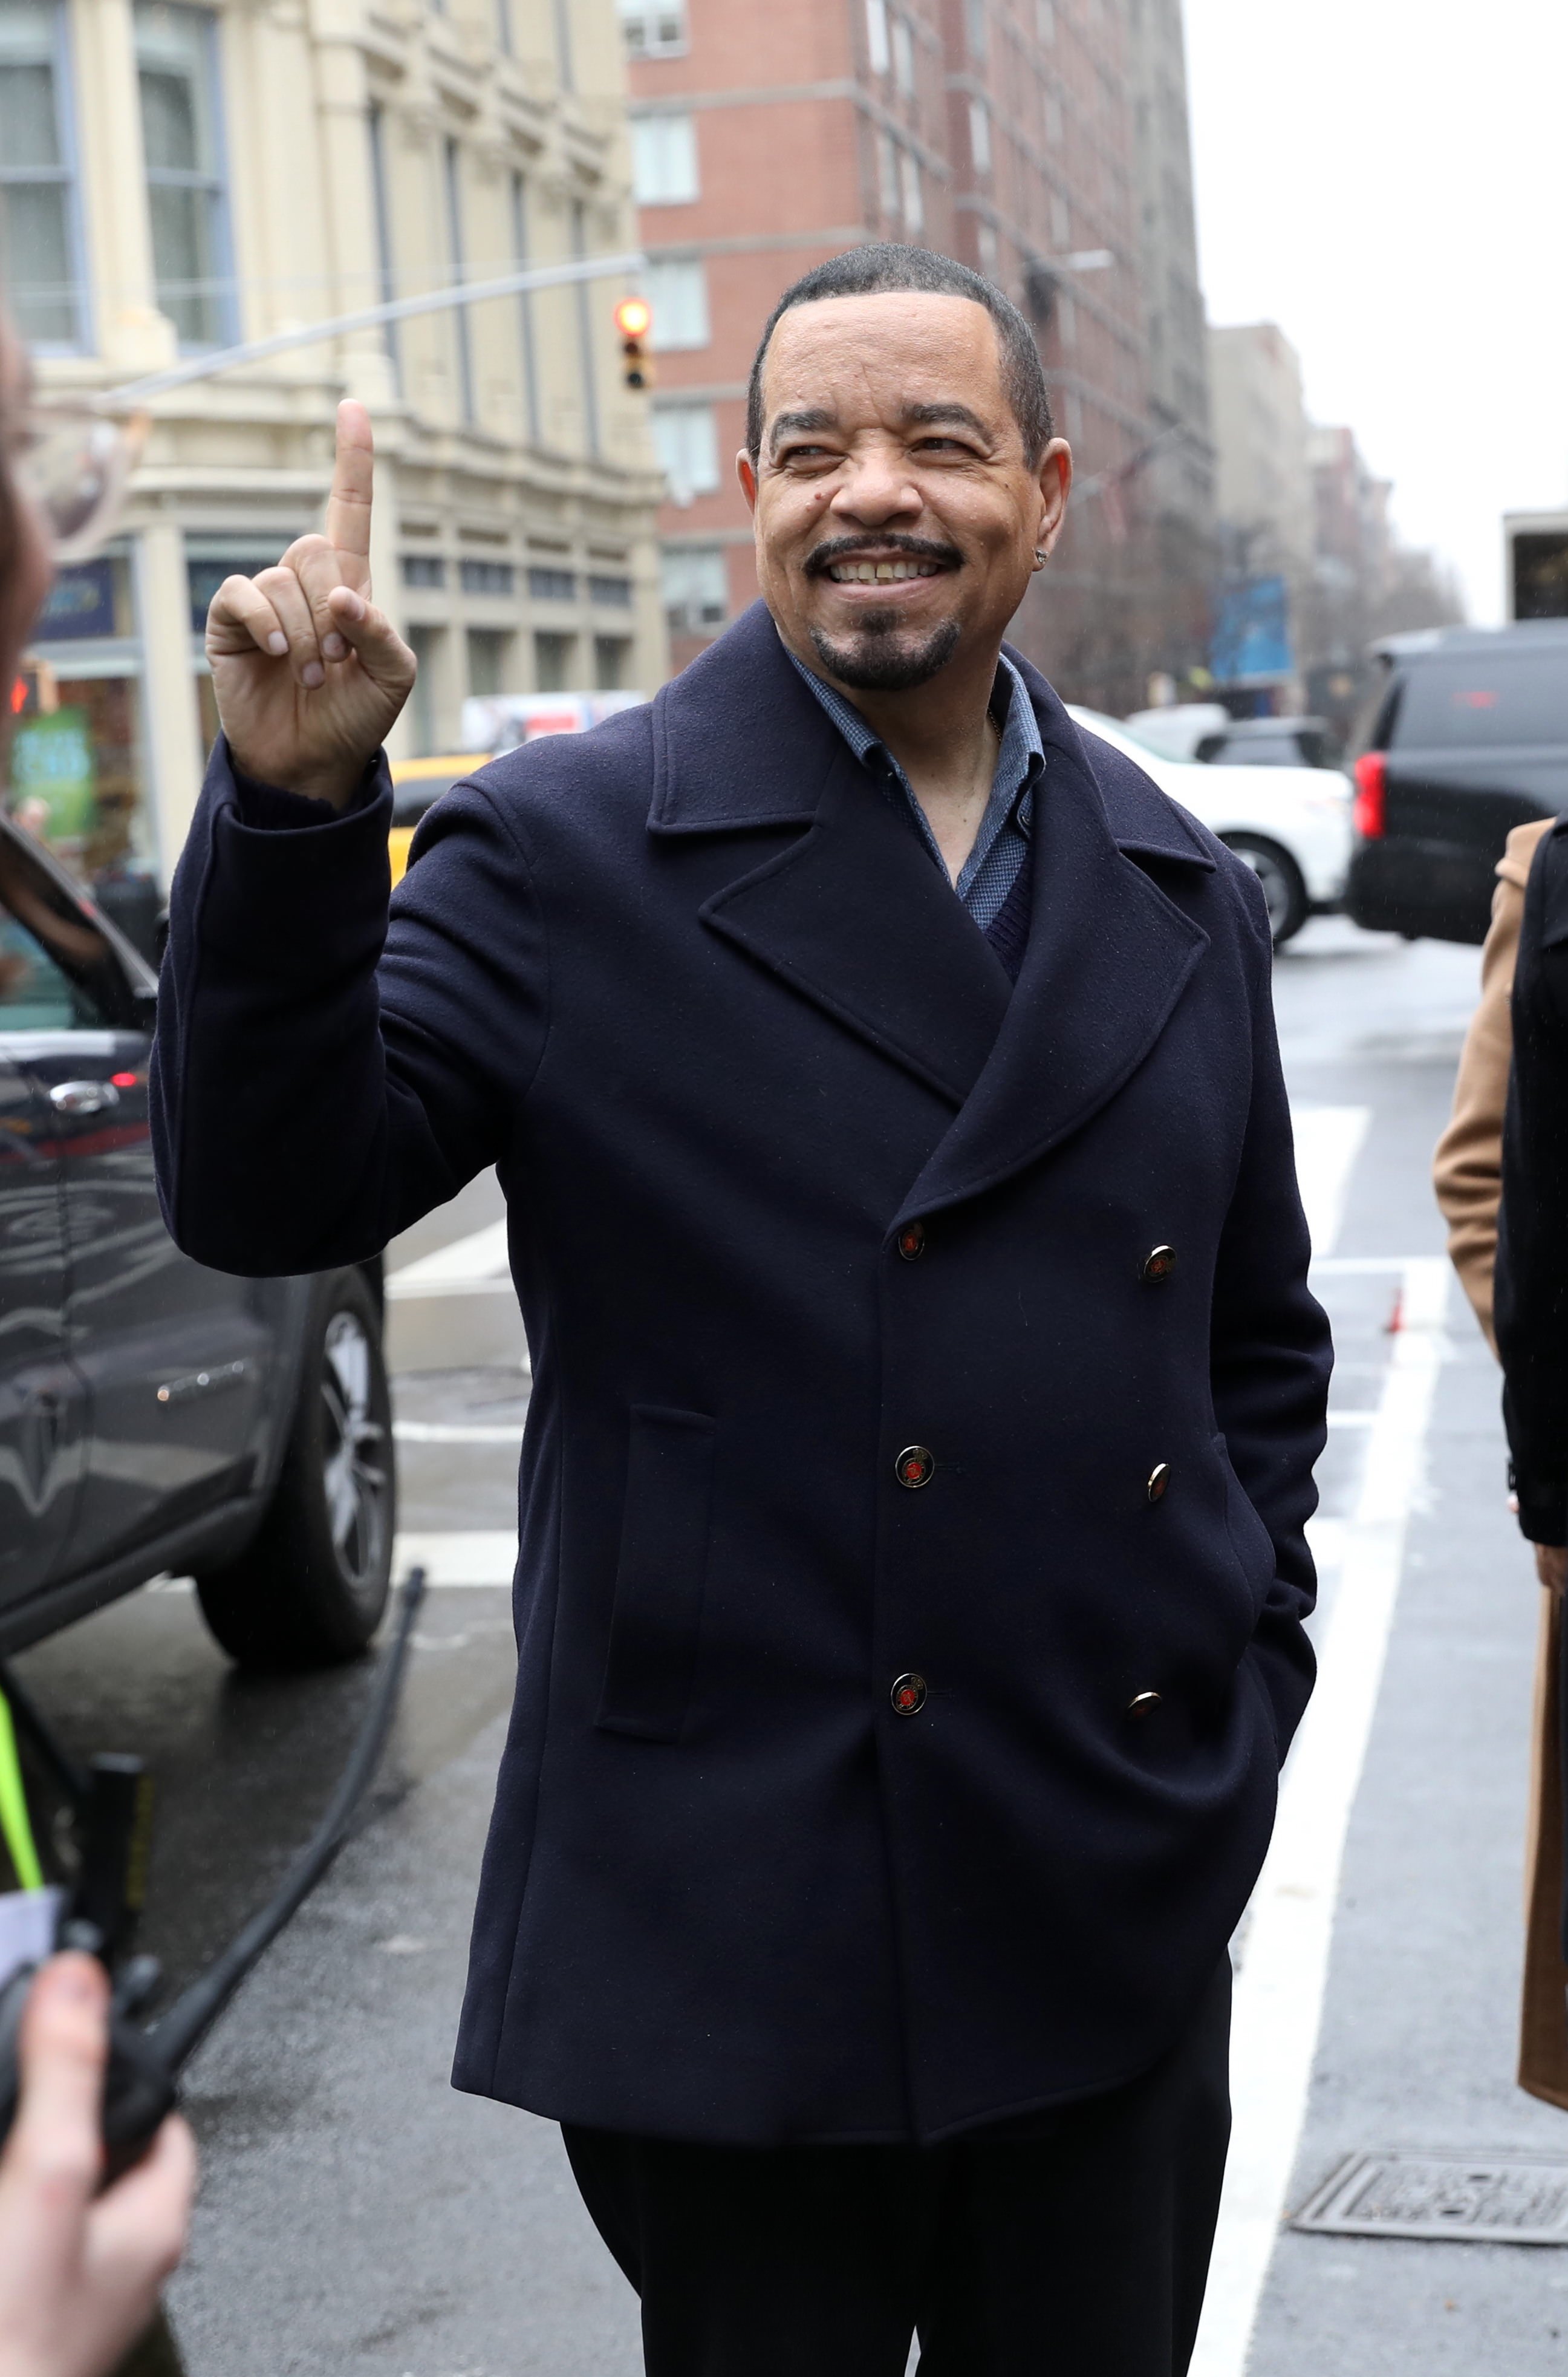  Ice-T on the set of "Law and Order: Special Victims Unit," 2020 | Source: Getty Images